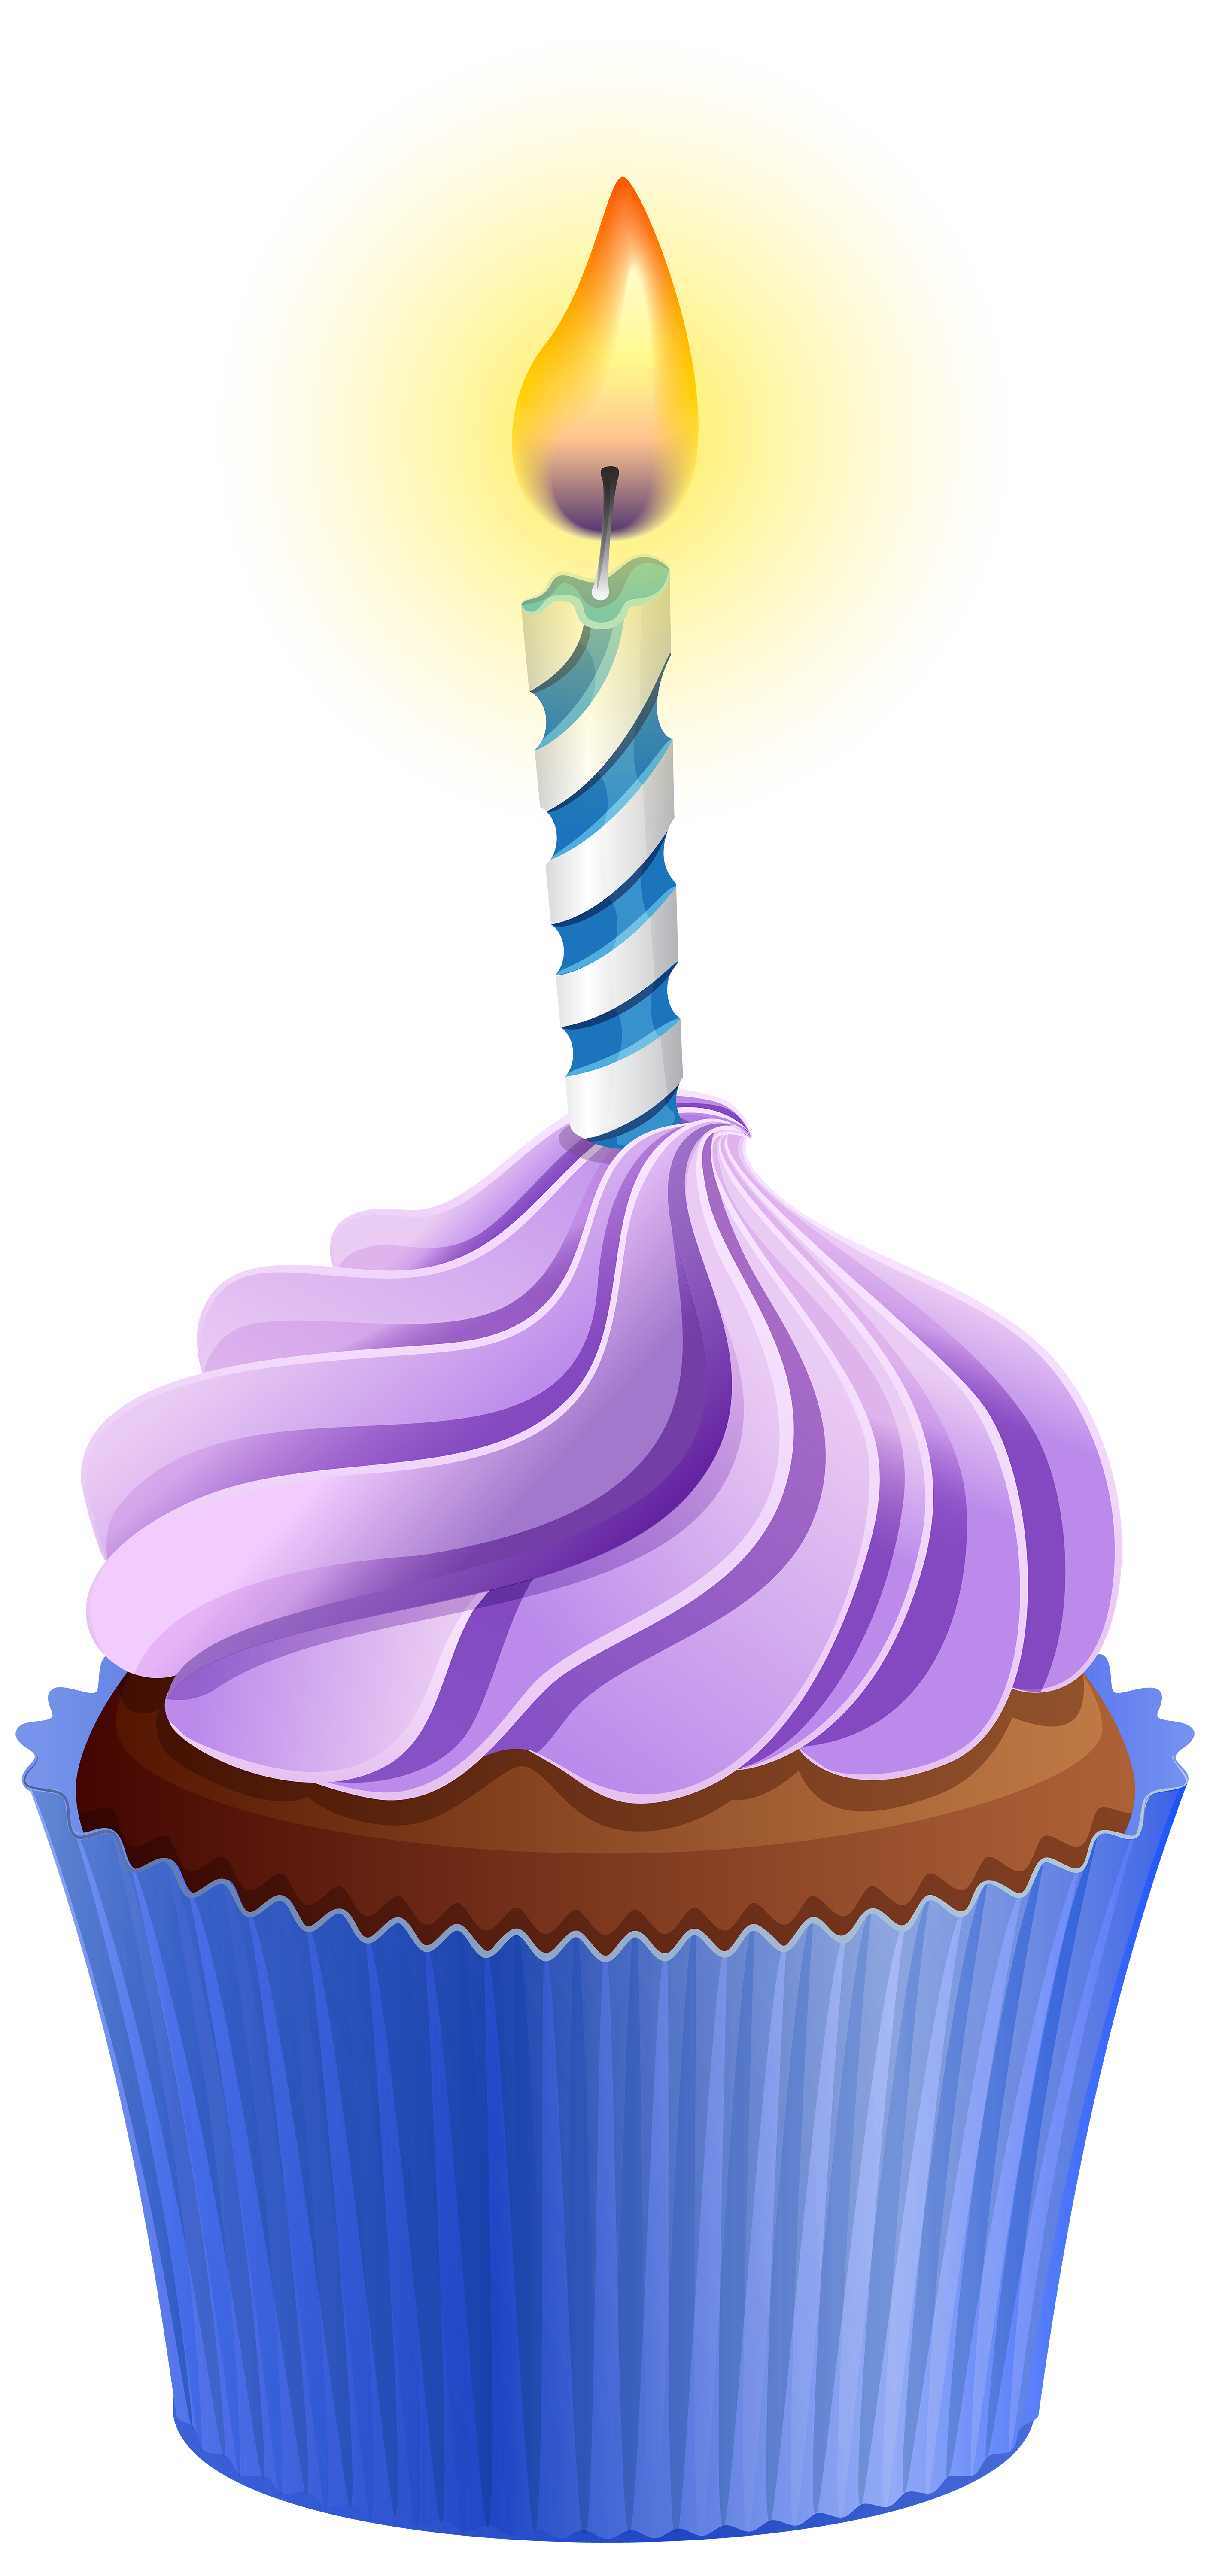 Birthday Cupcake with Candle PNG Clip Art Image​ | Gallery Yopriceville -  High-Quality Free Images and Transparent PNG Clipart